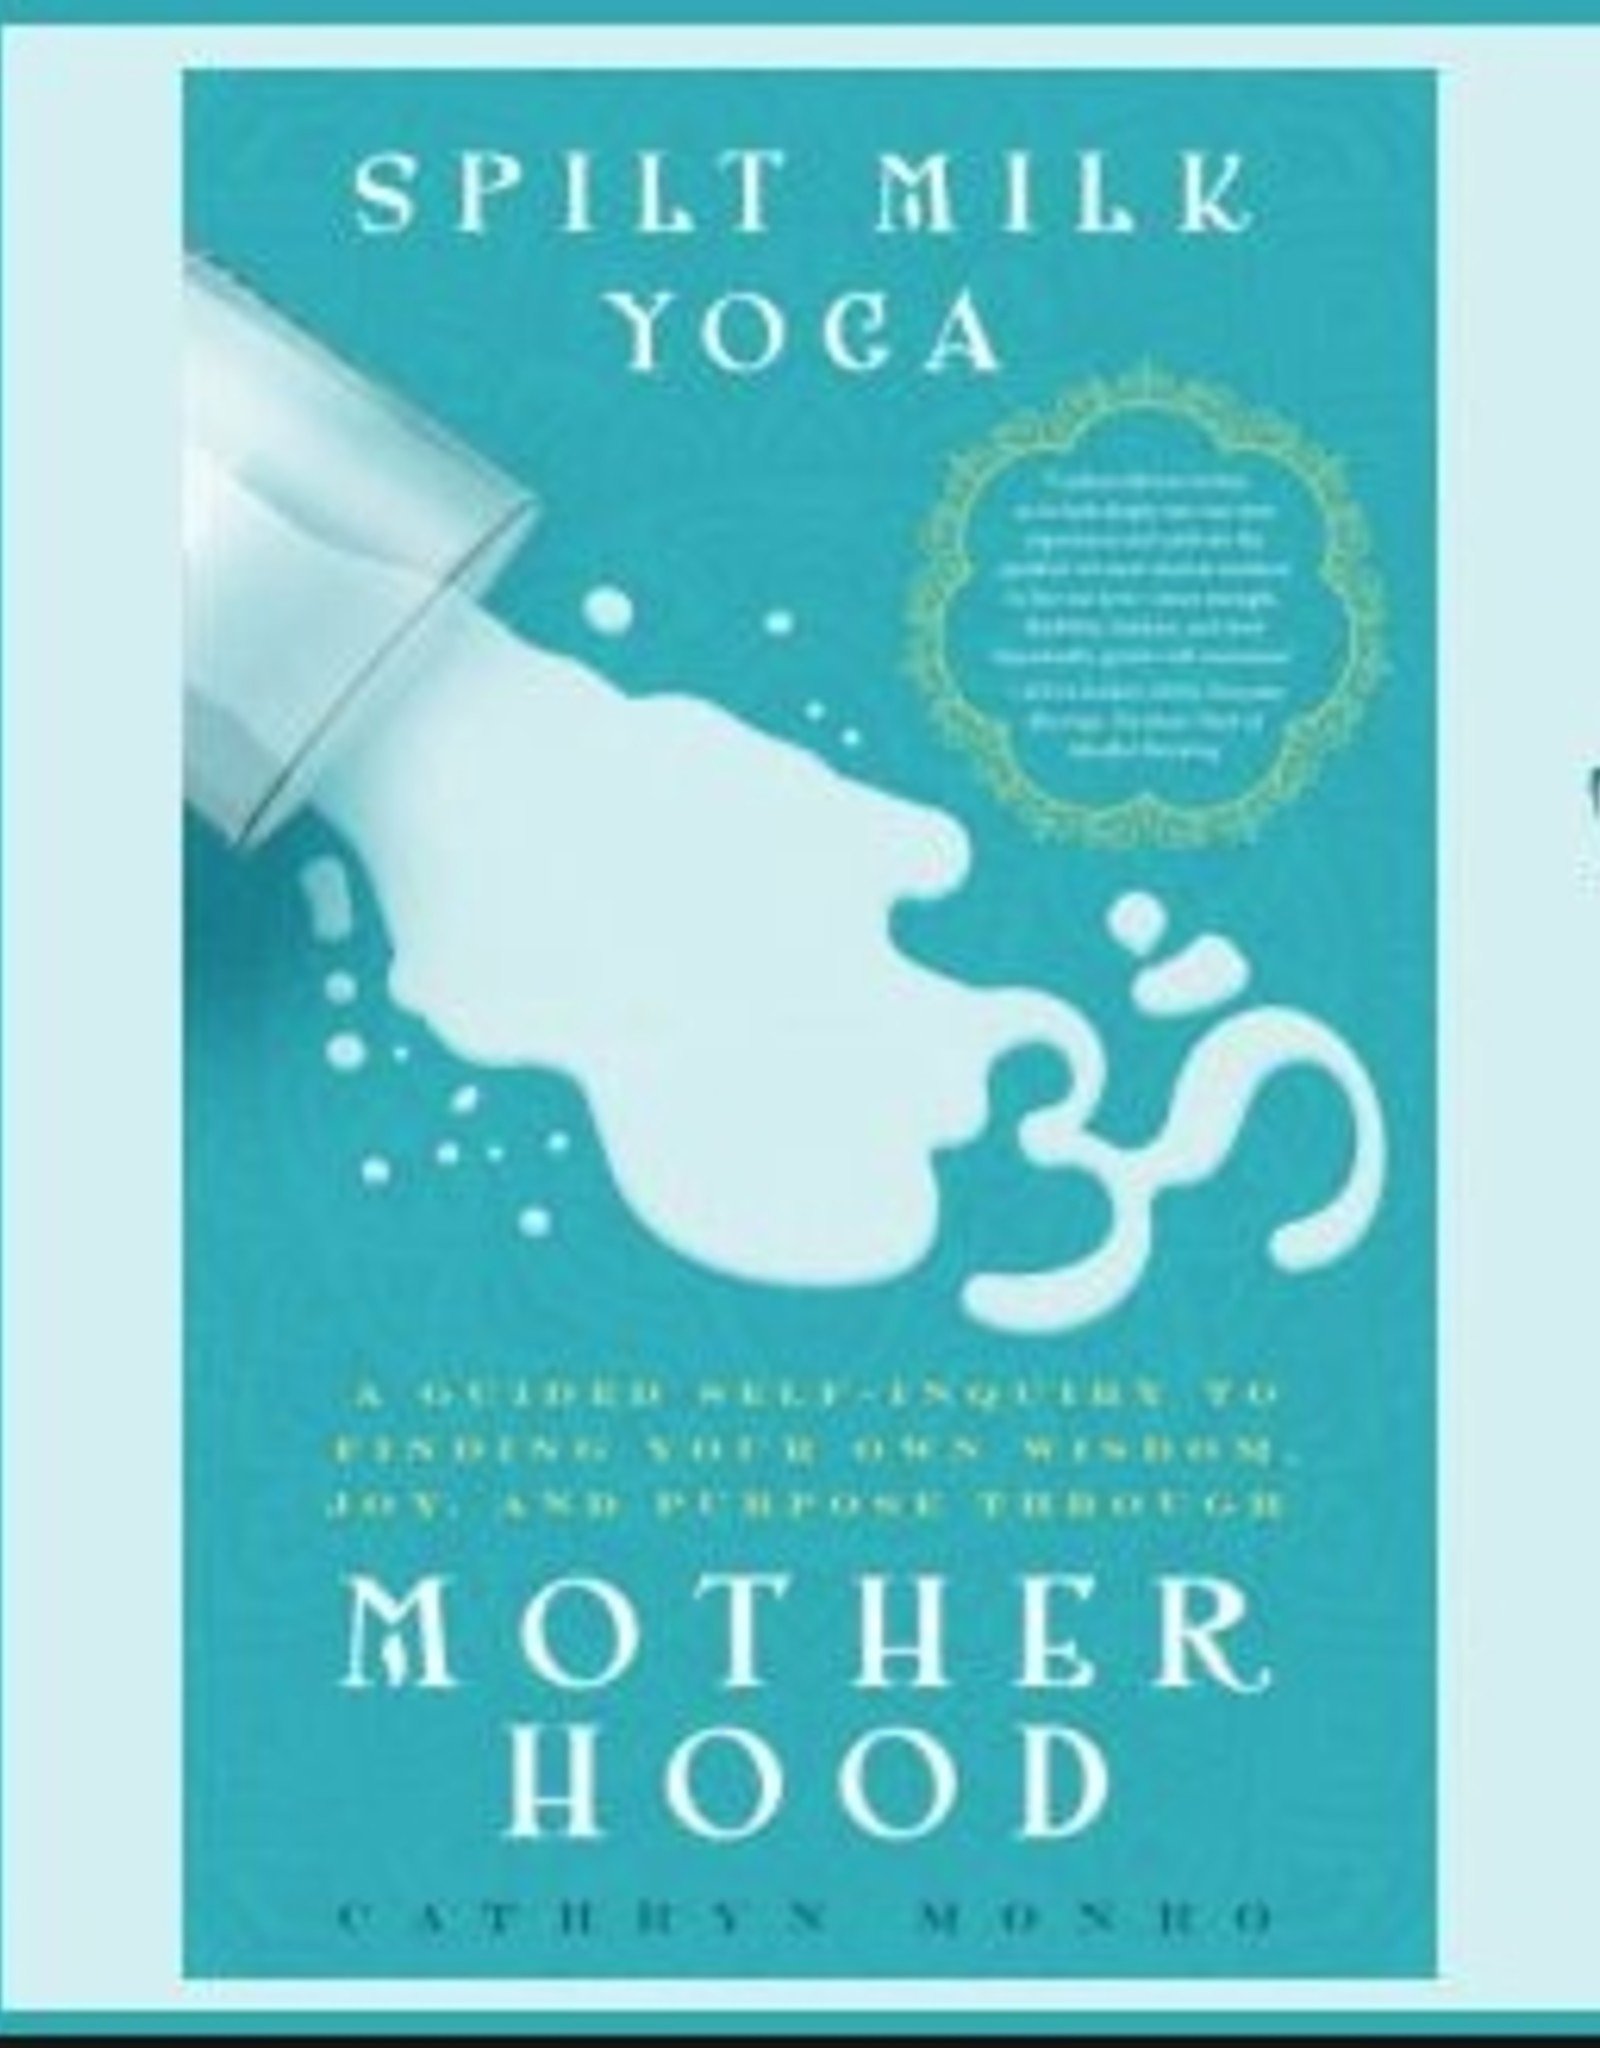 Ingram Spilt Milk Yoga: A Guided Self-Inquiry to Finding Your Own Wisdom, Joy, and Purpose Through Motherhood